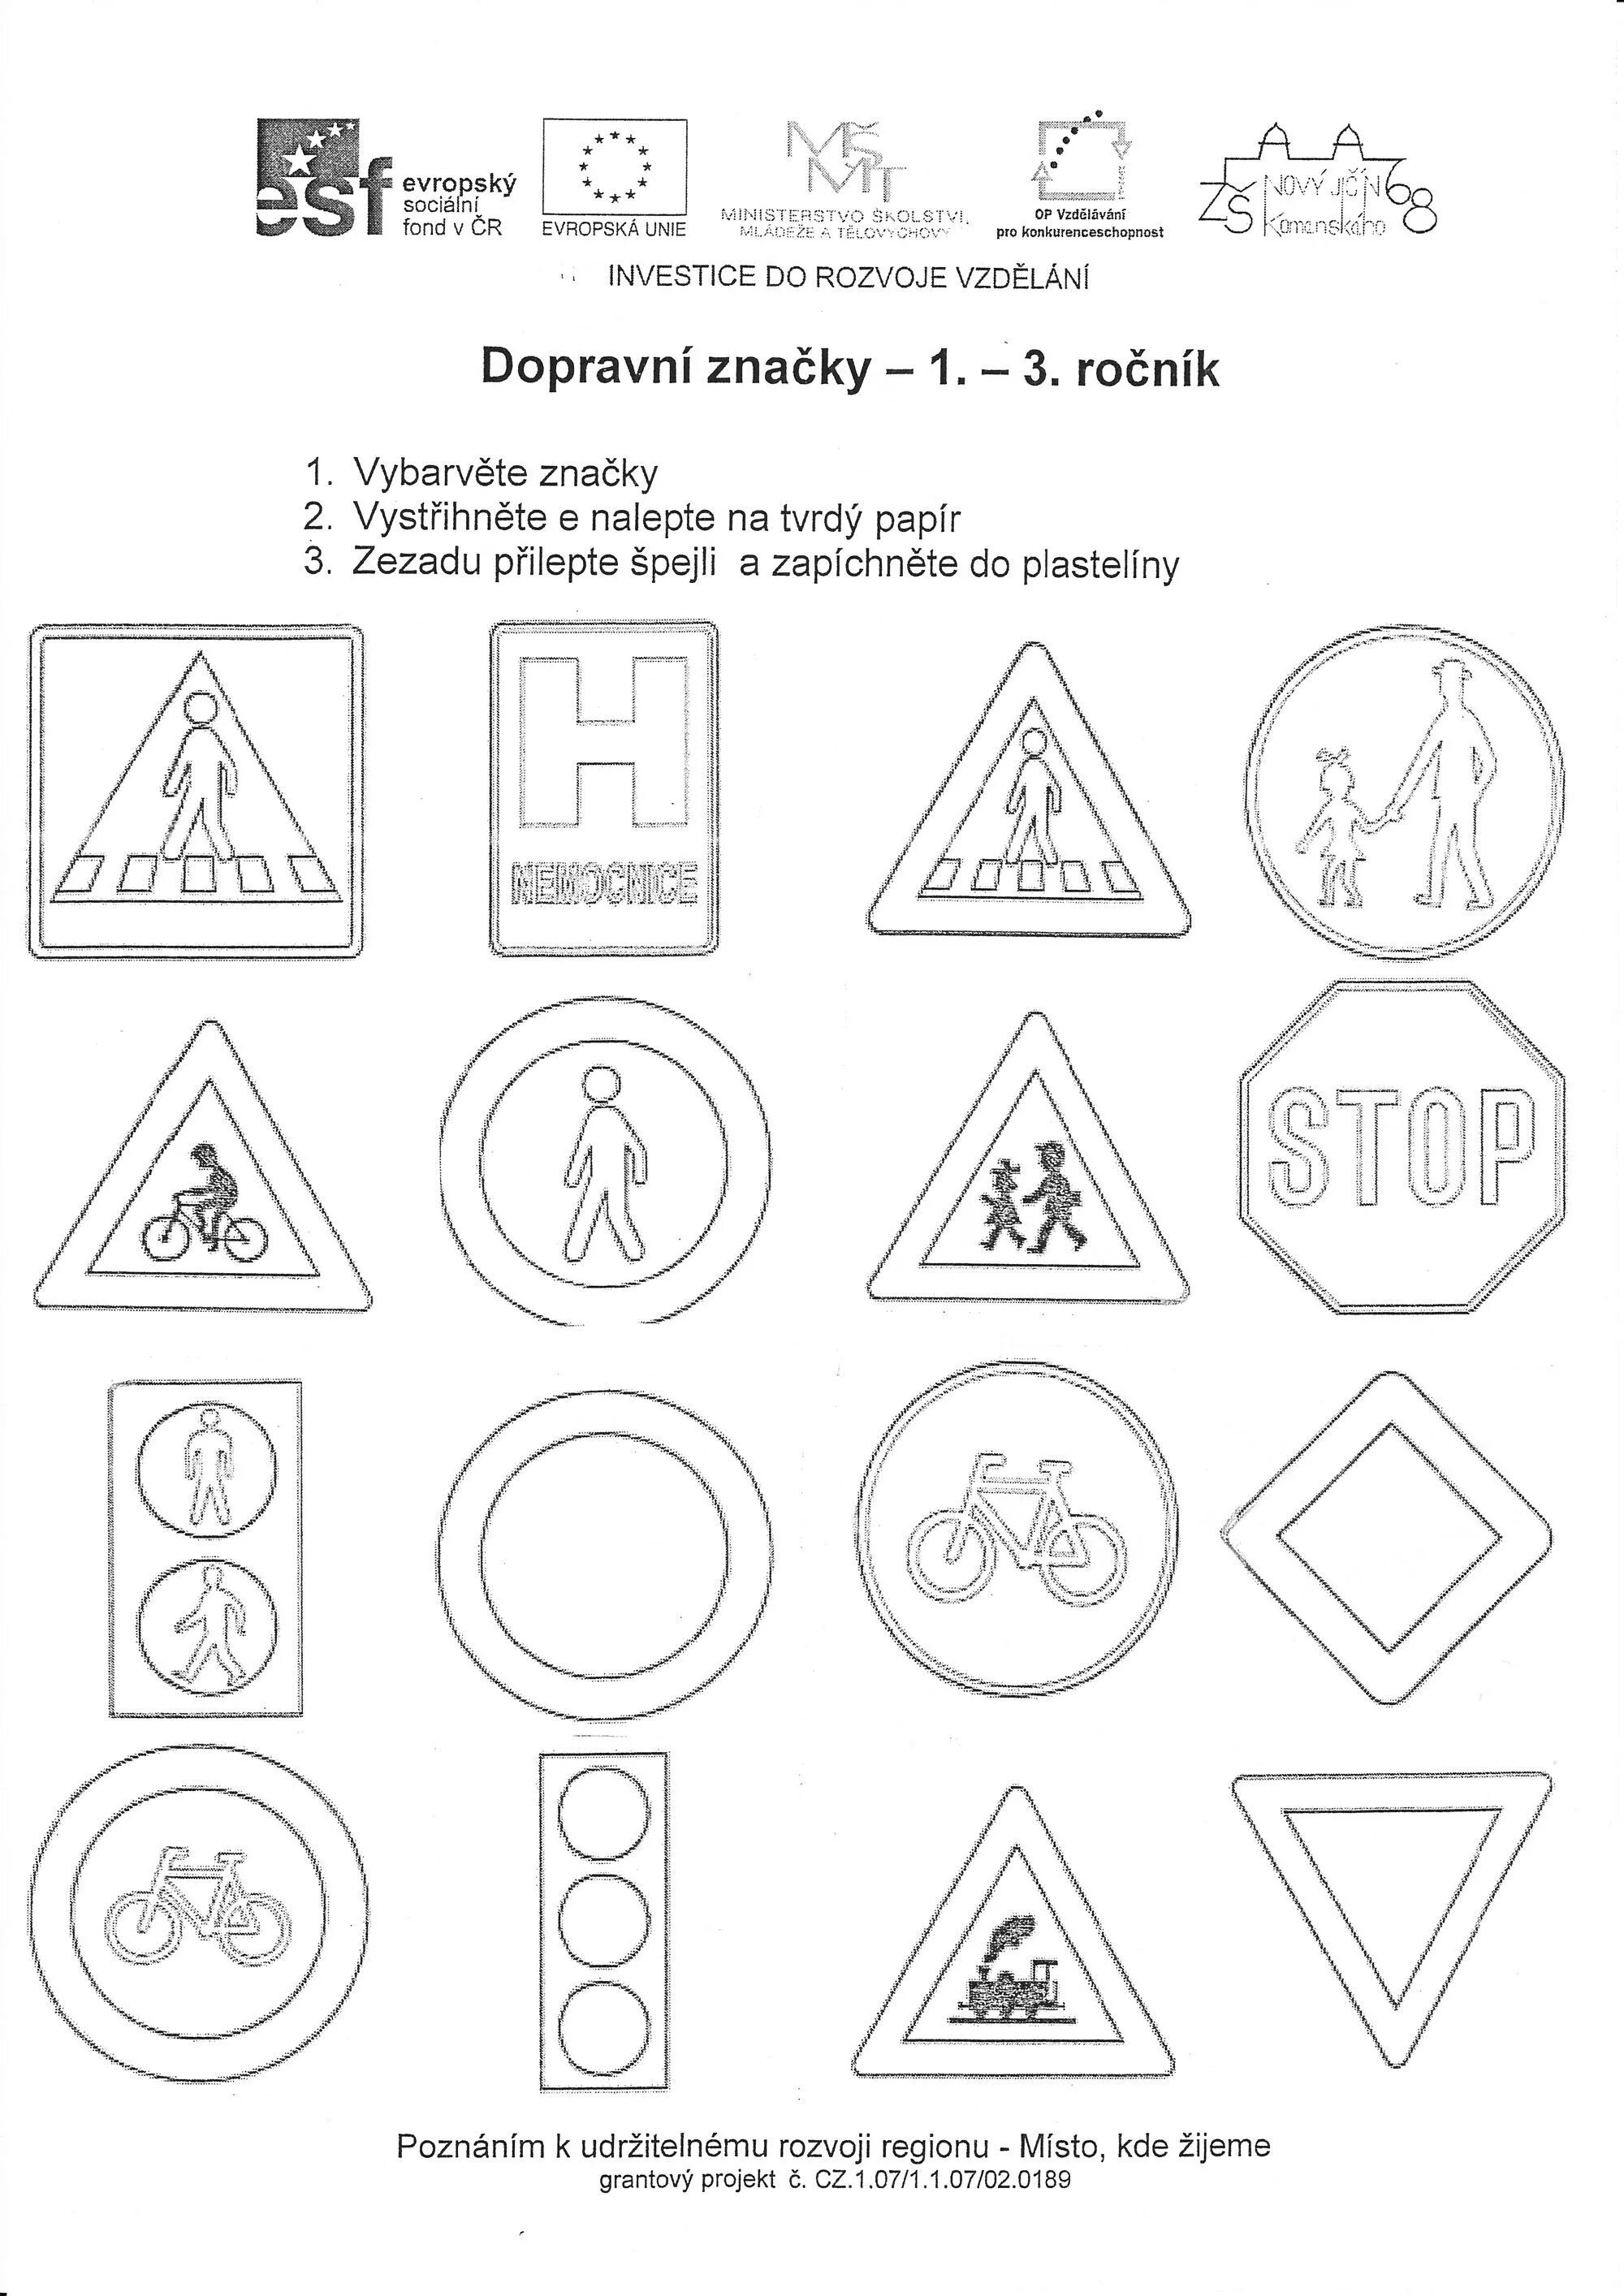 Traffic signs for preschoolers #11